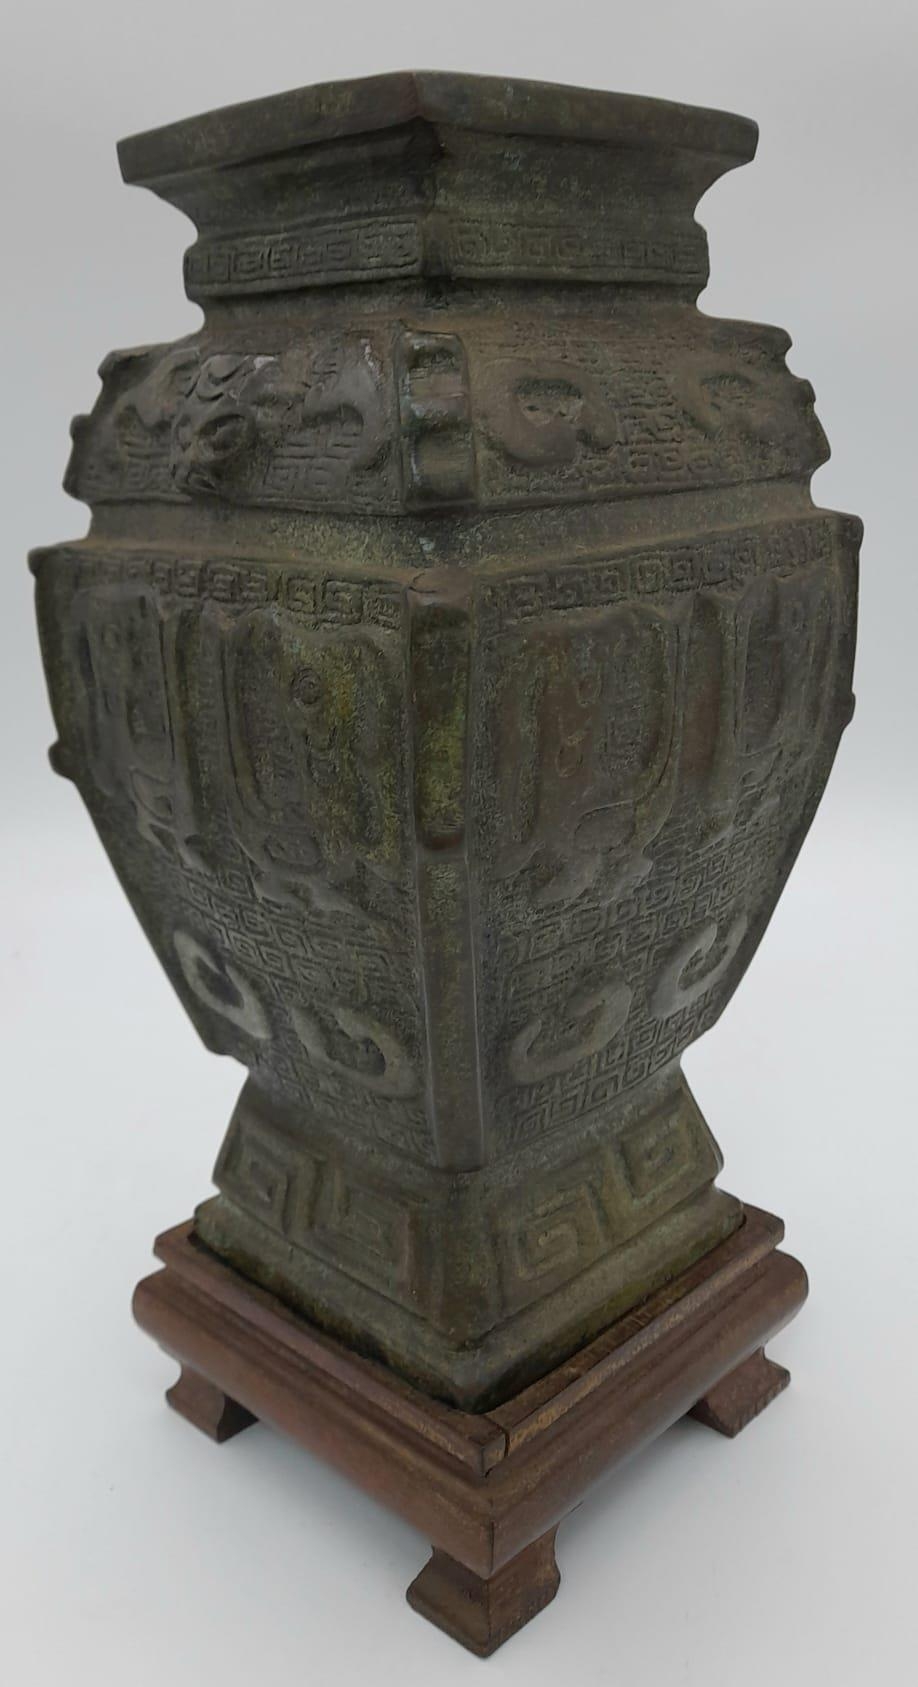 A Beautiful Qing Dynasty Bronze vase. Wonderful archaic detail with a well-aged patina. Comes on a - Image 2 of 3